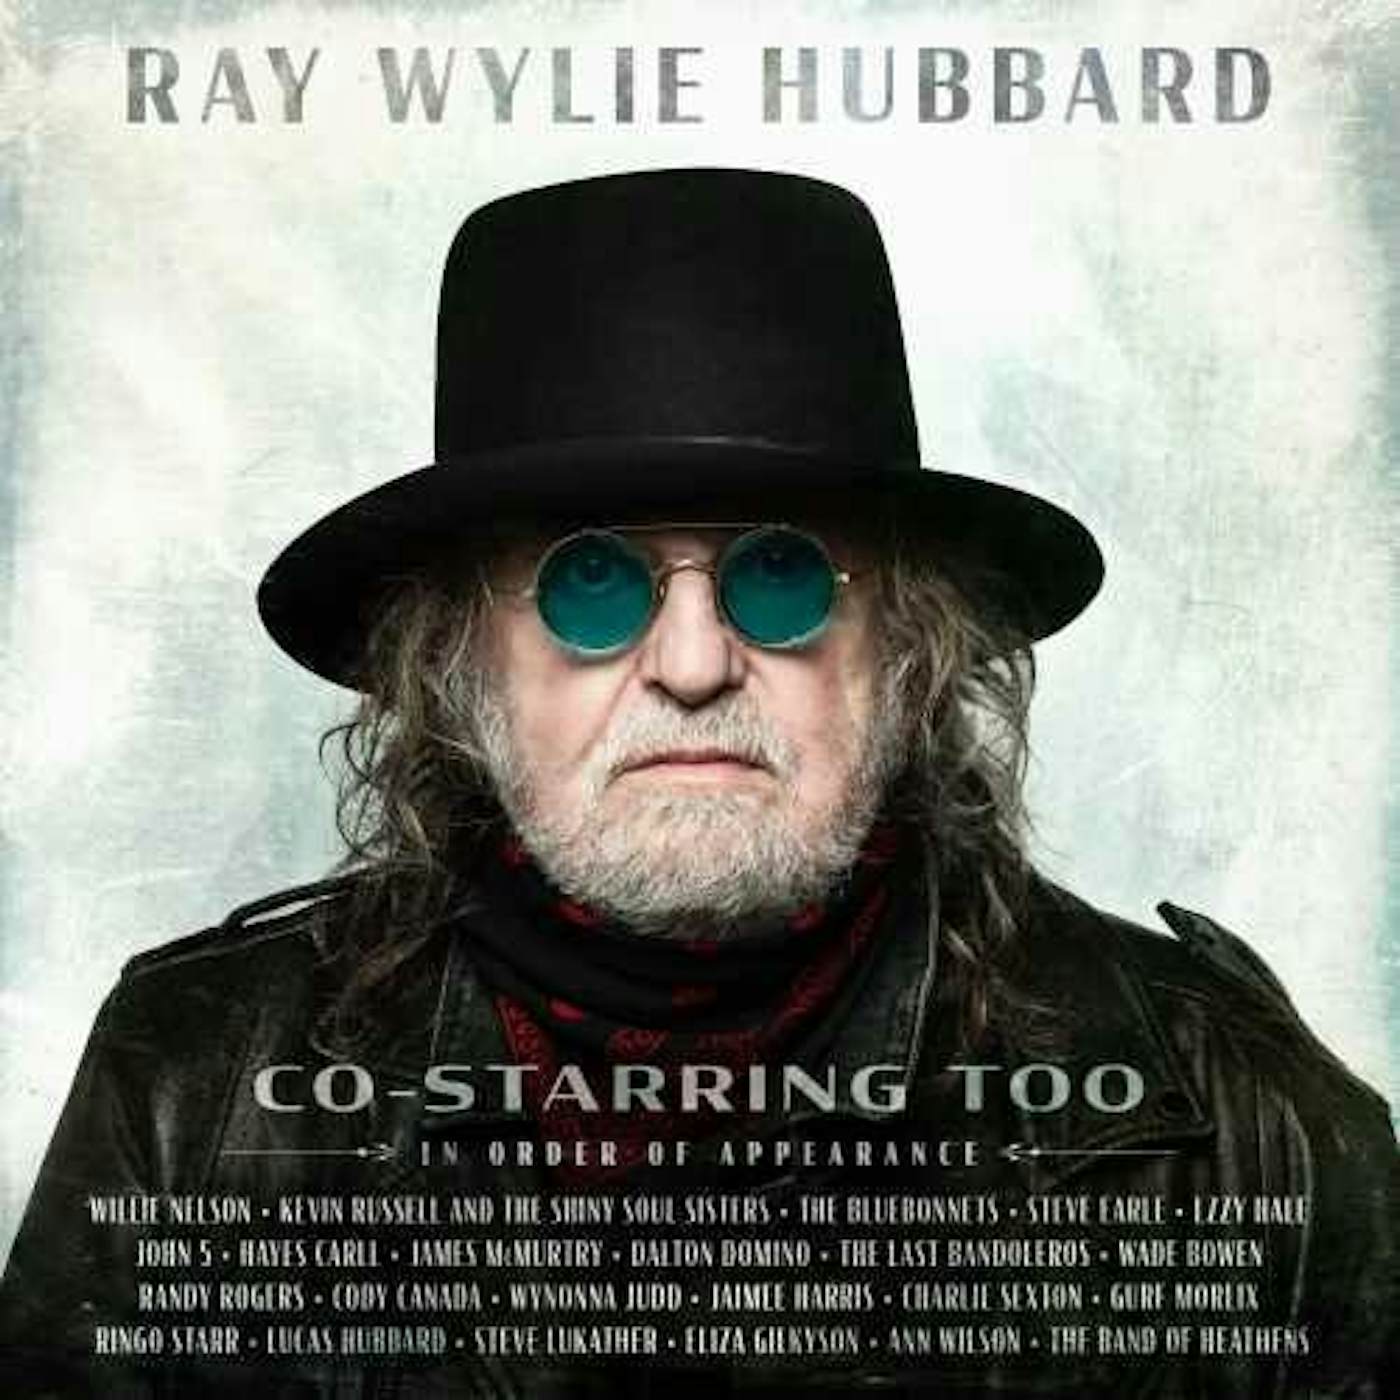 Ray Wylie Hubbard CO-STARRING TOO CD